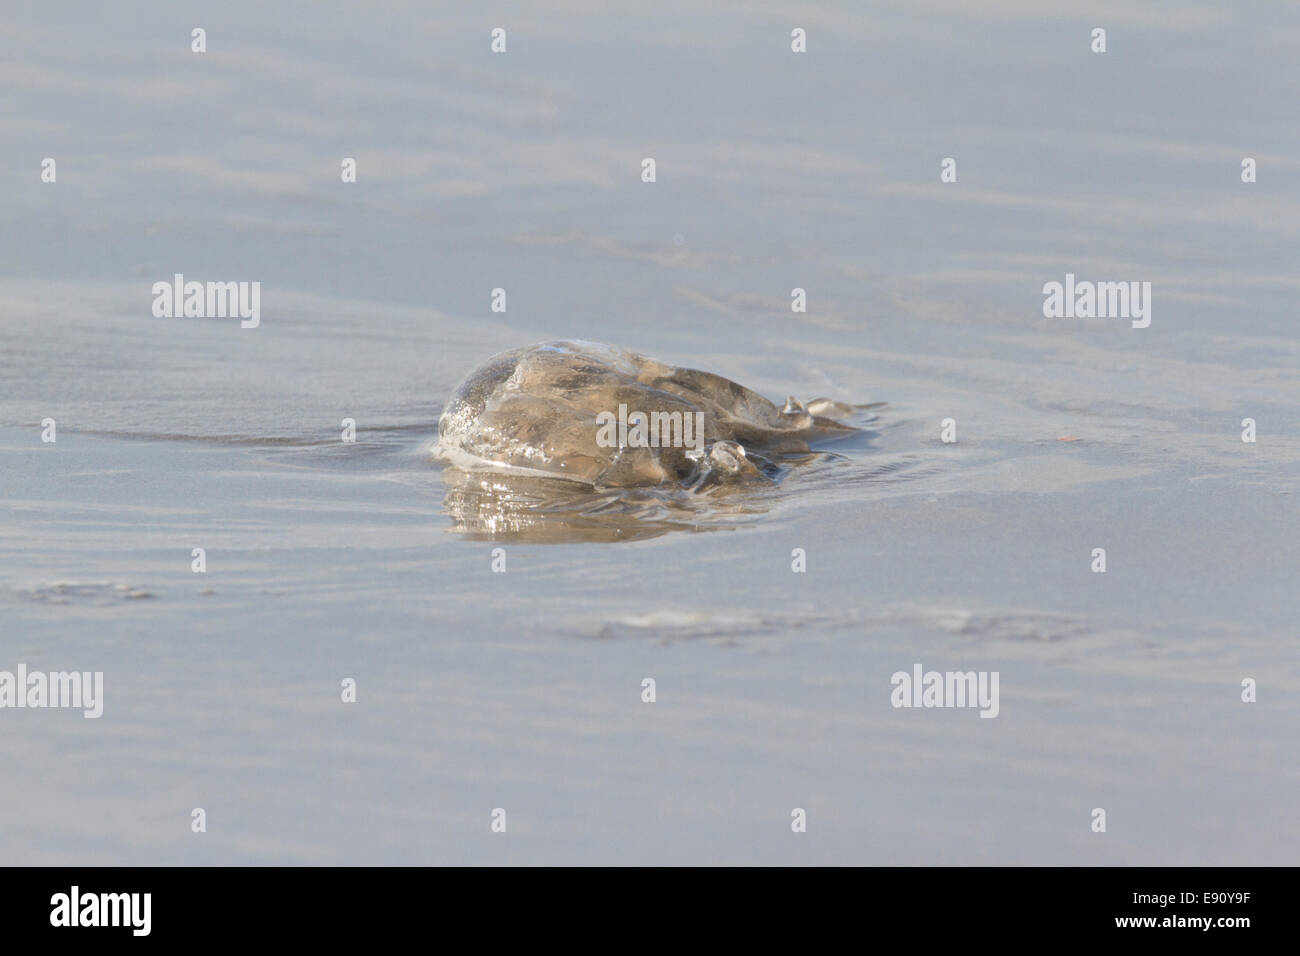 Jellyfish washed up on the beach. Stock Photo